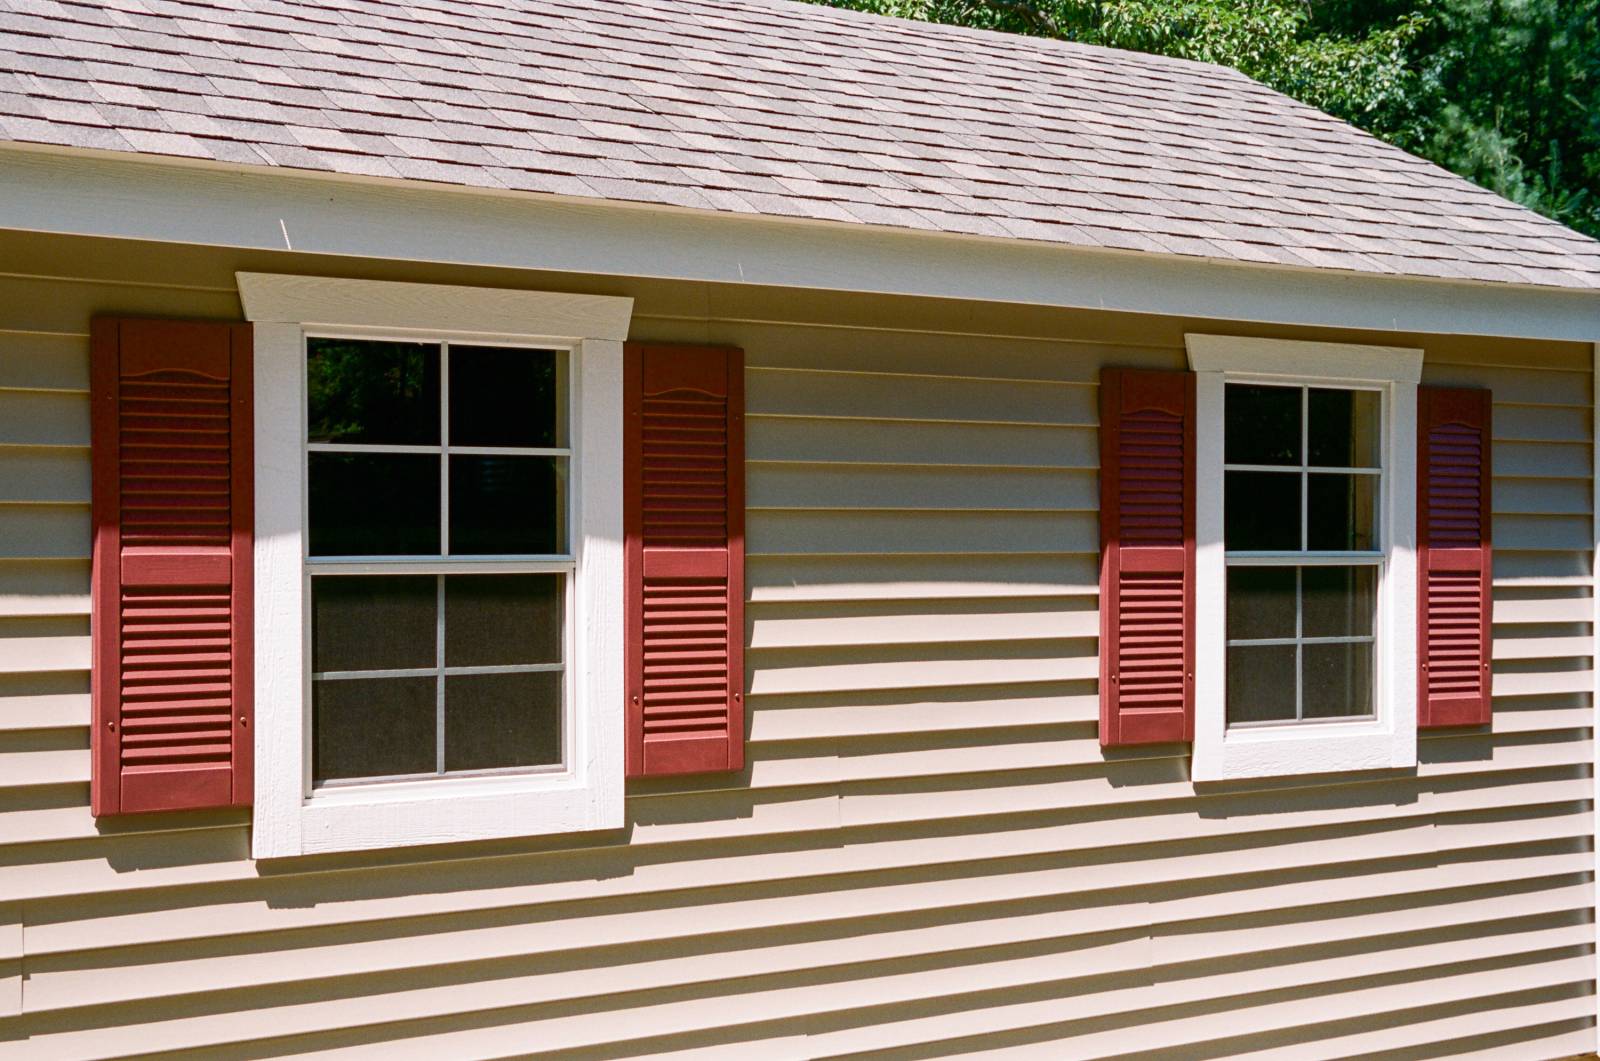 24x36 4/4 Single Hung Windows with Screens & 1x3 Trim • Barn Red Louvered 12"³ Shutters